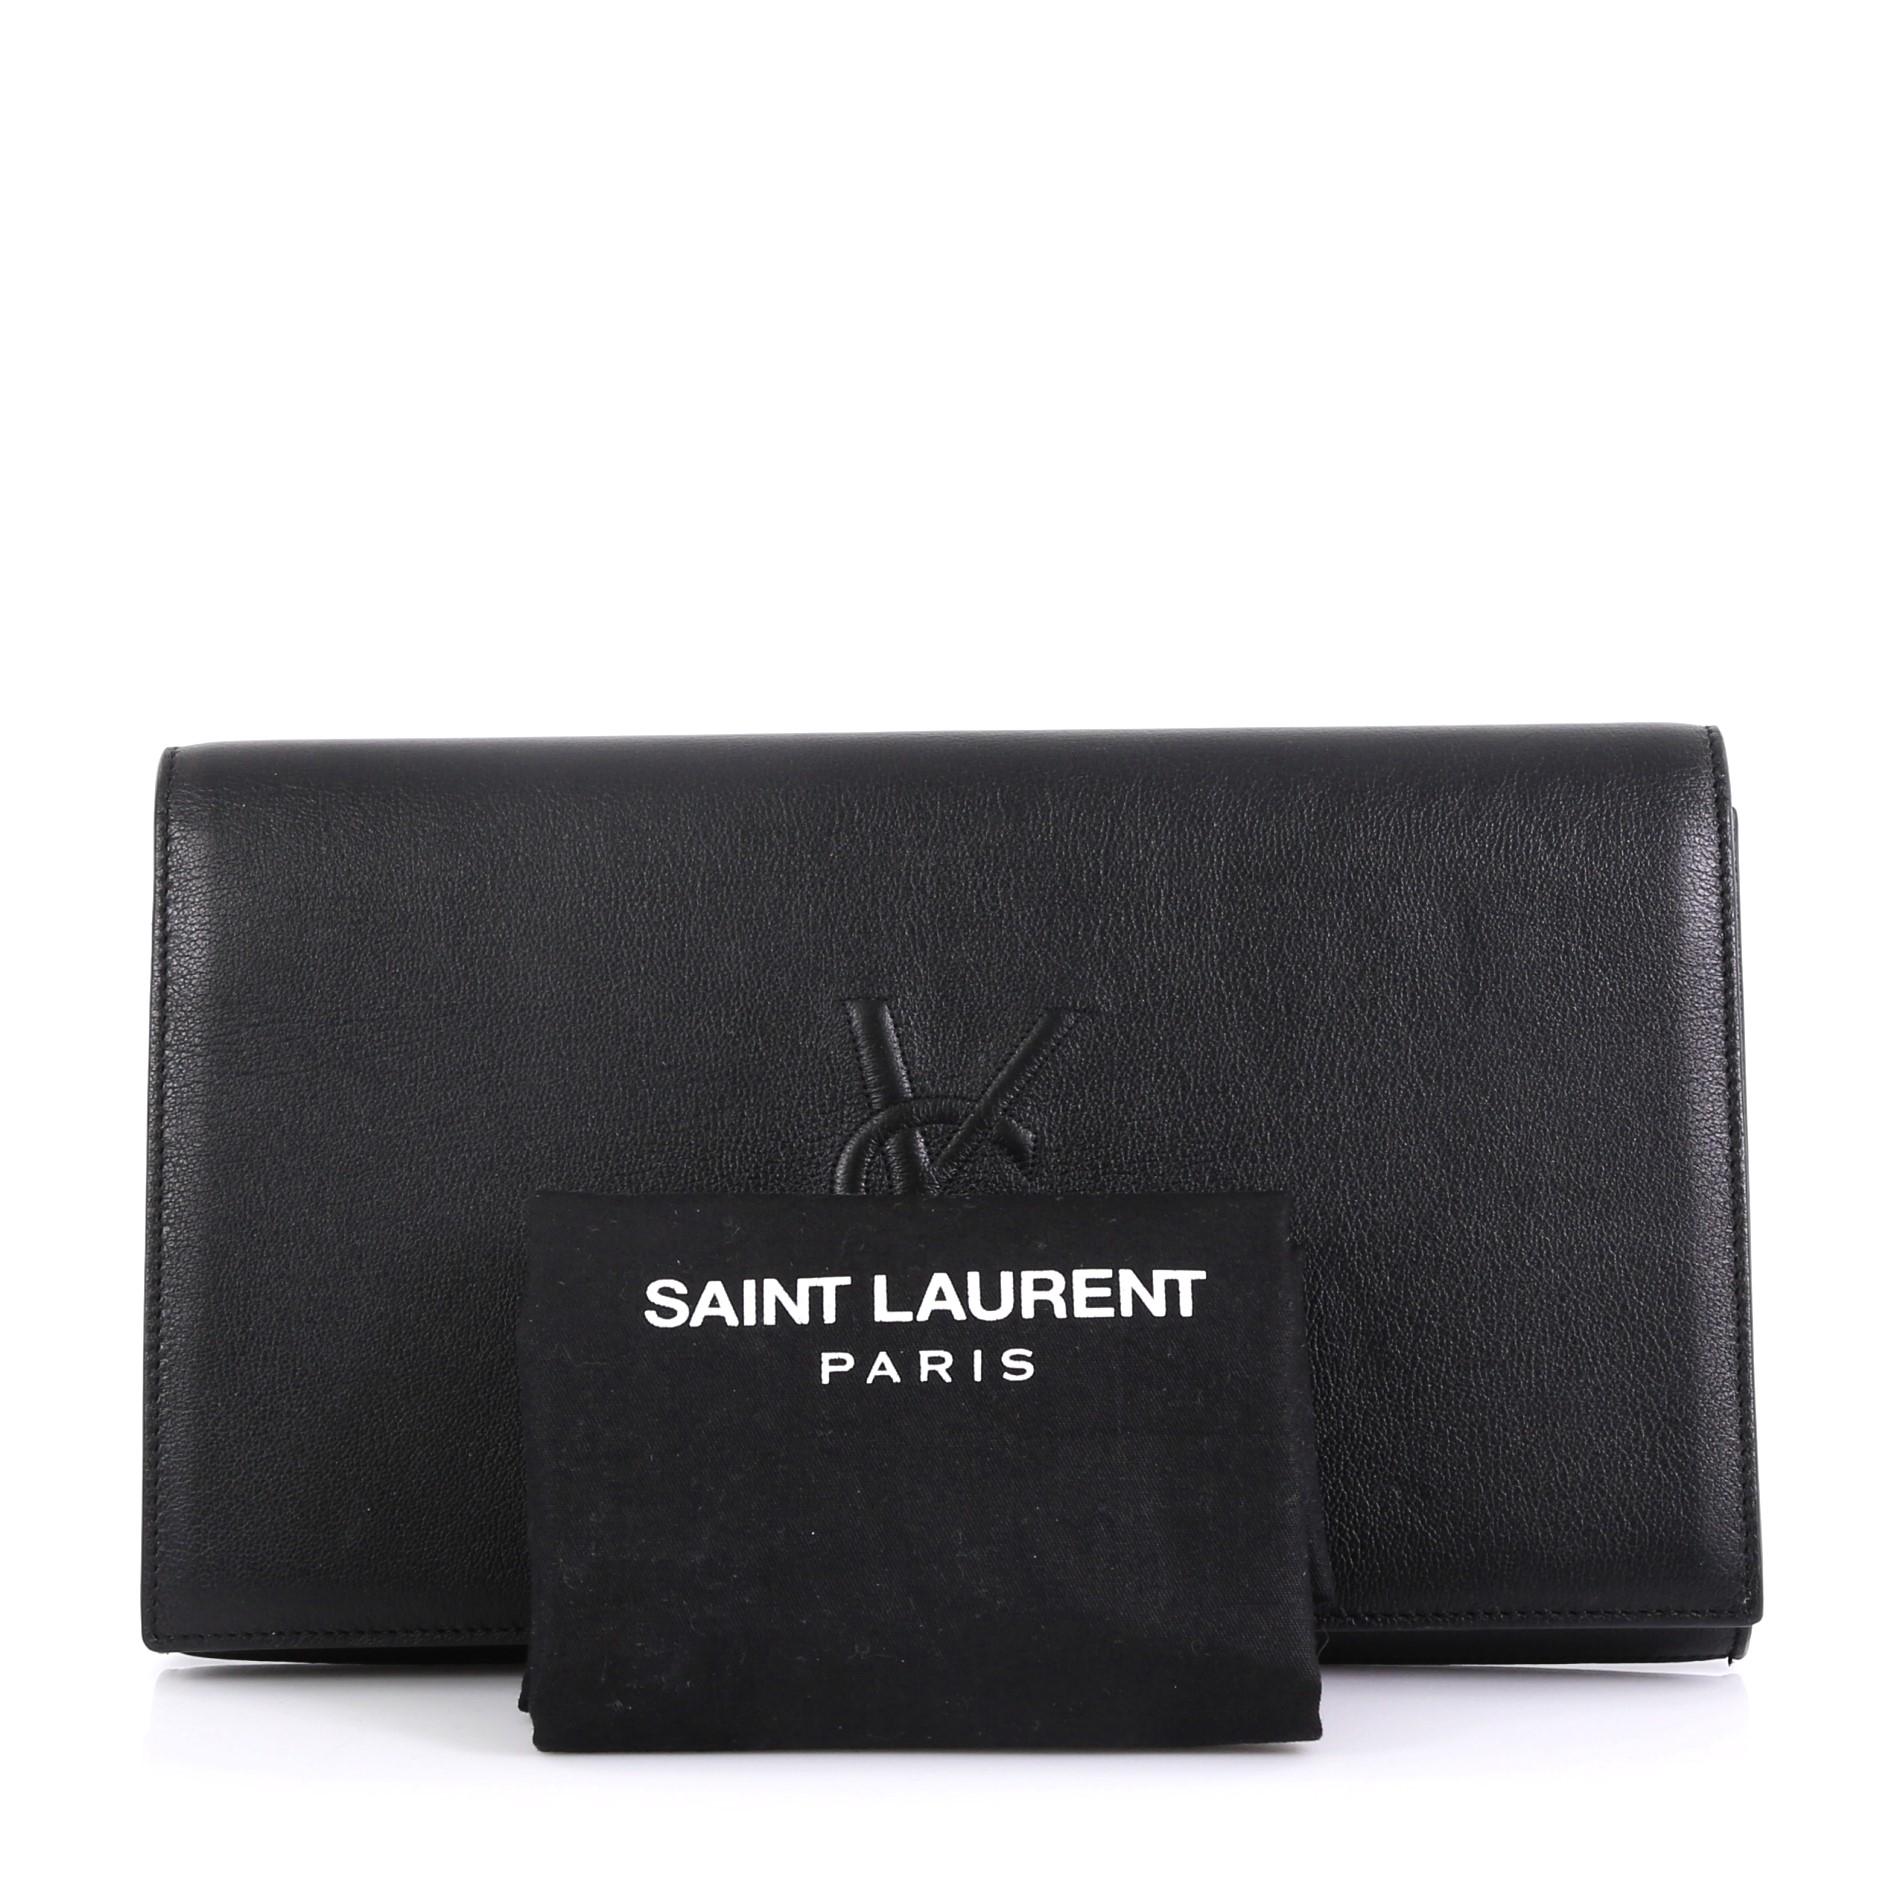 This Saint Laurent Belle de Jour Clutch Leather Large, crafted in black leather, features gold-tone hardware. Its magnetic snap closure opens to a black satin interior with slip pocket. 

Estimated Retail Price: $895
Condition: Great. Slight